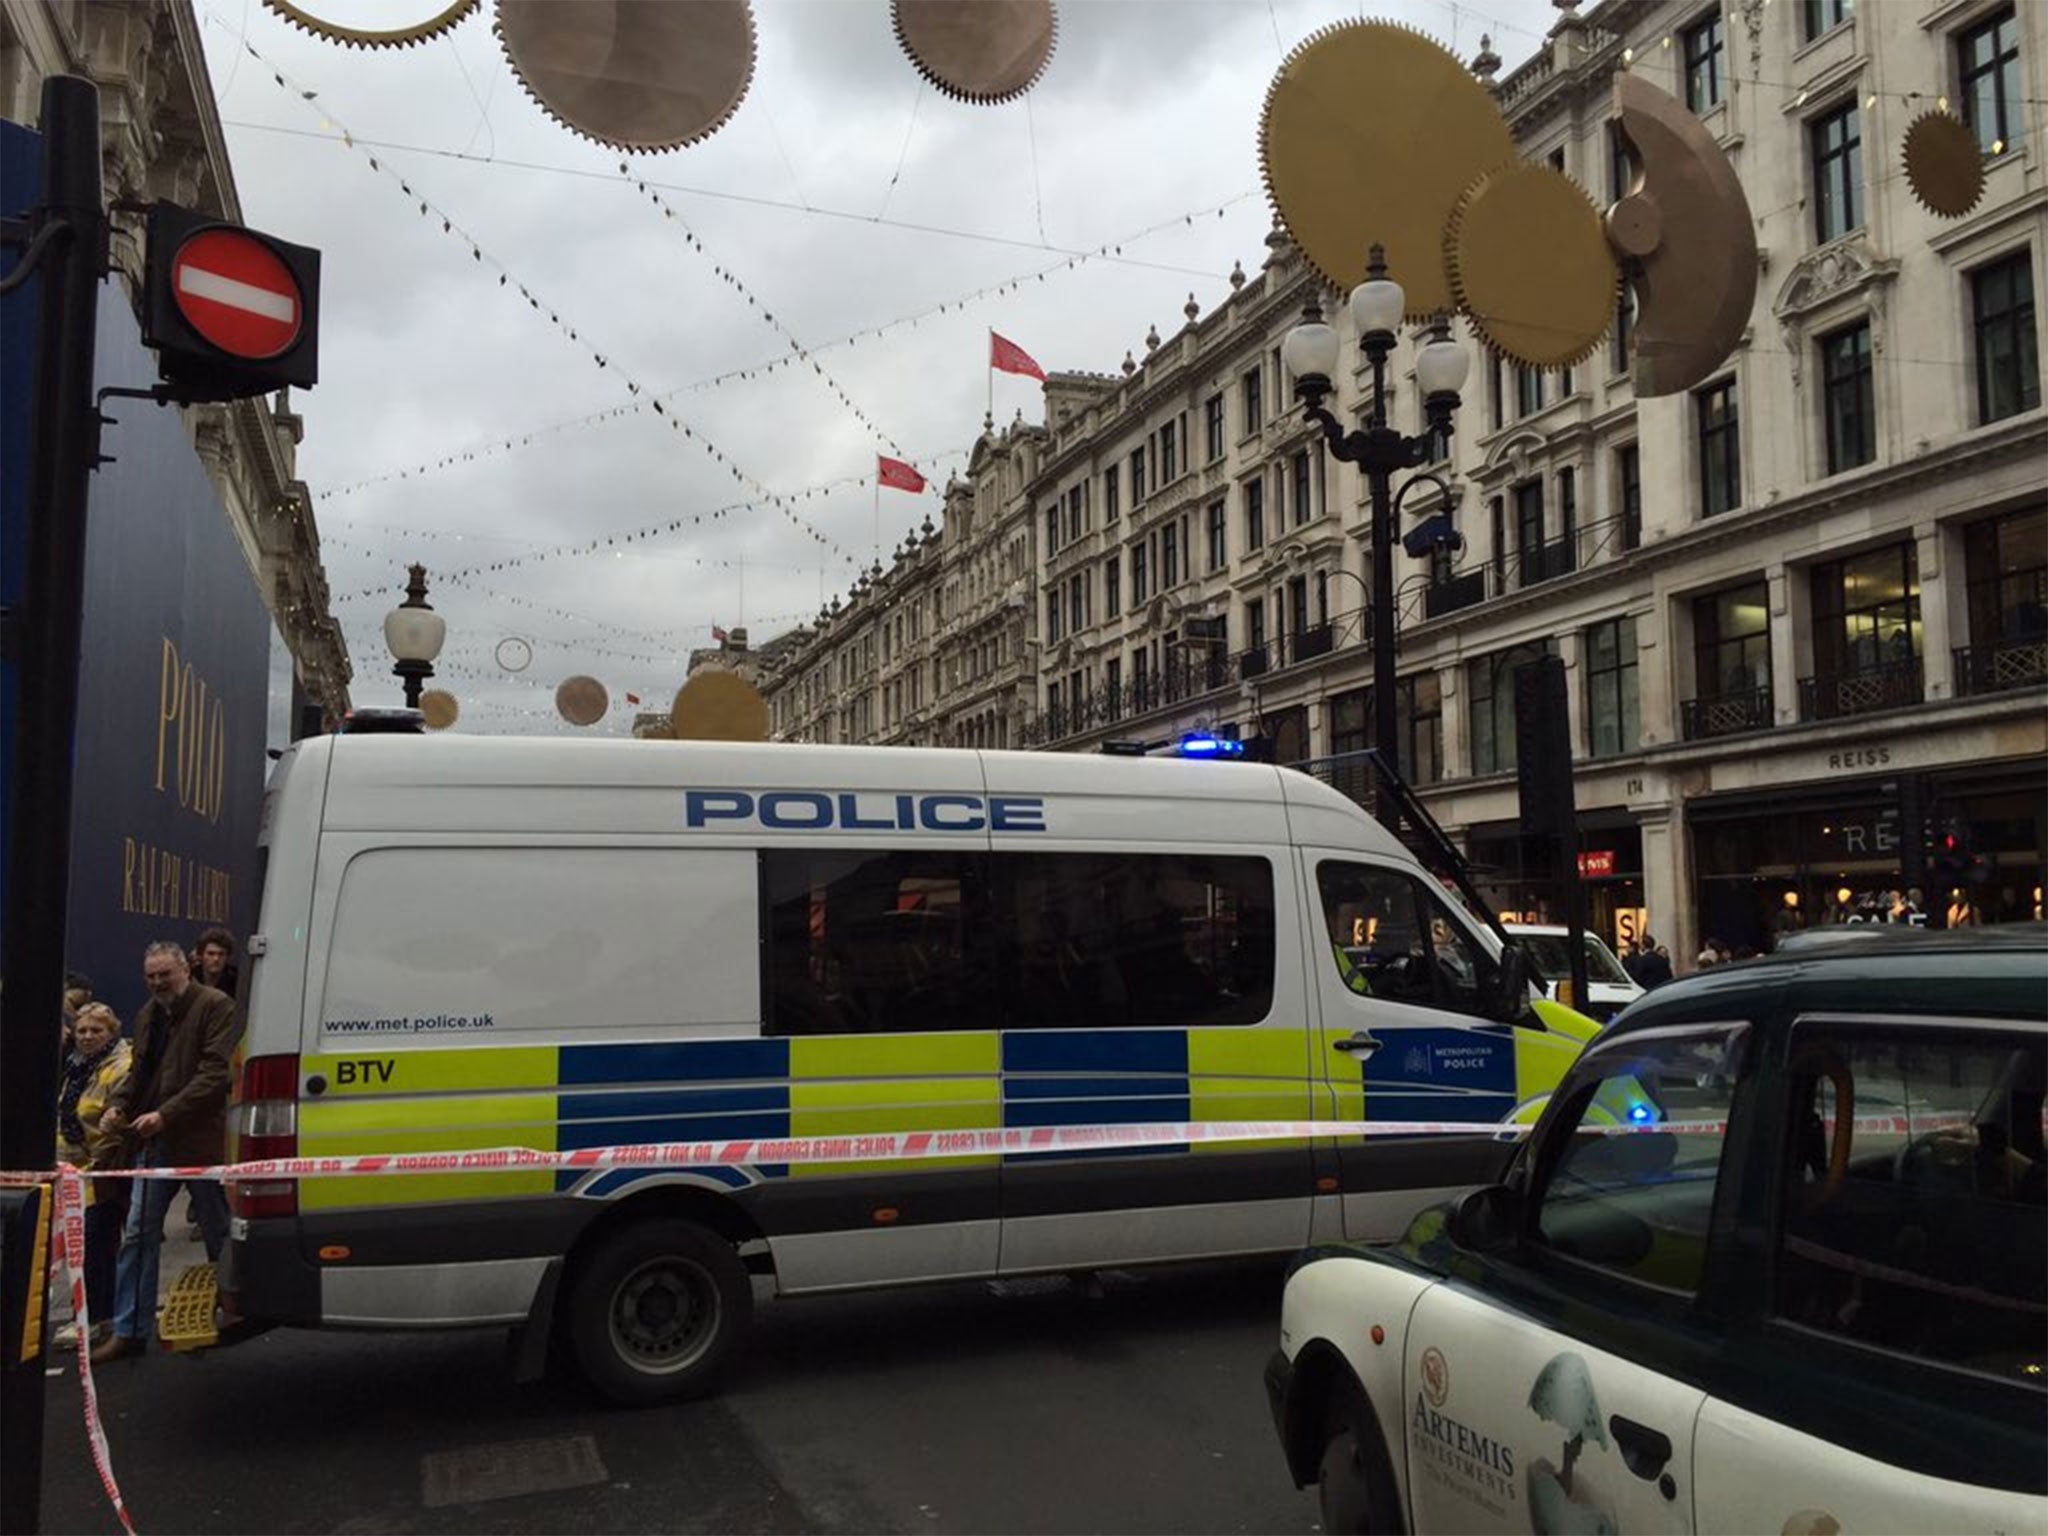 Police closed down Regent Street following reports of a suspicious vehicle